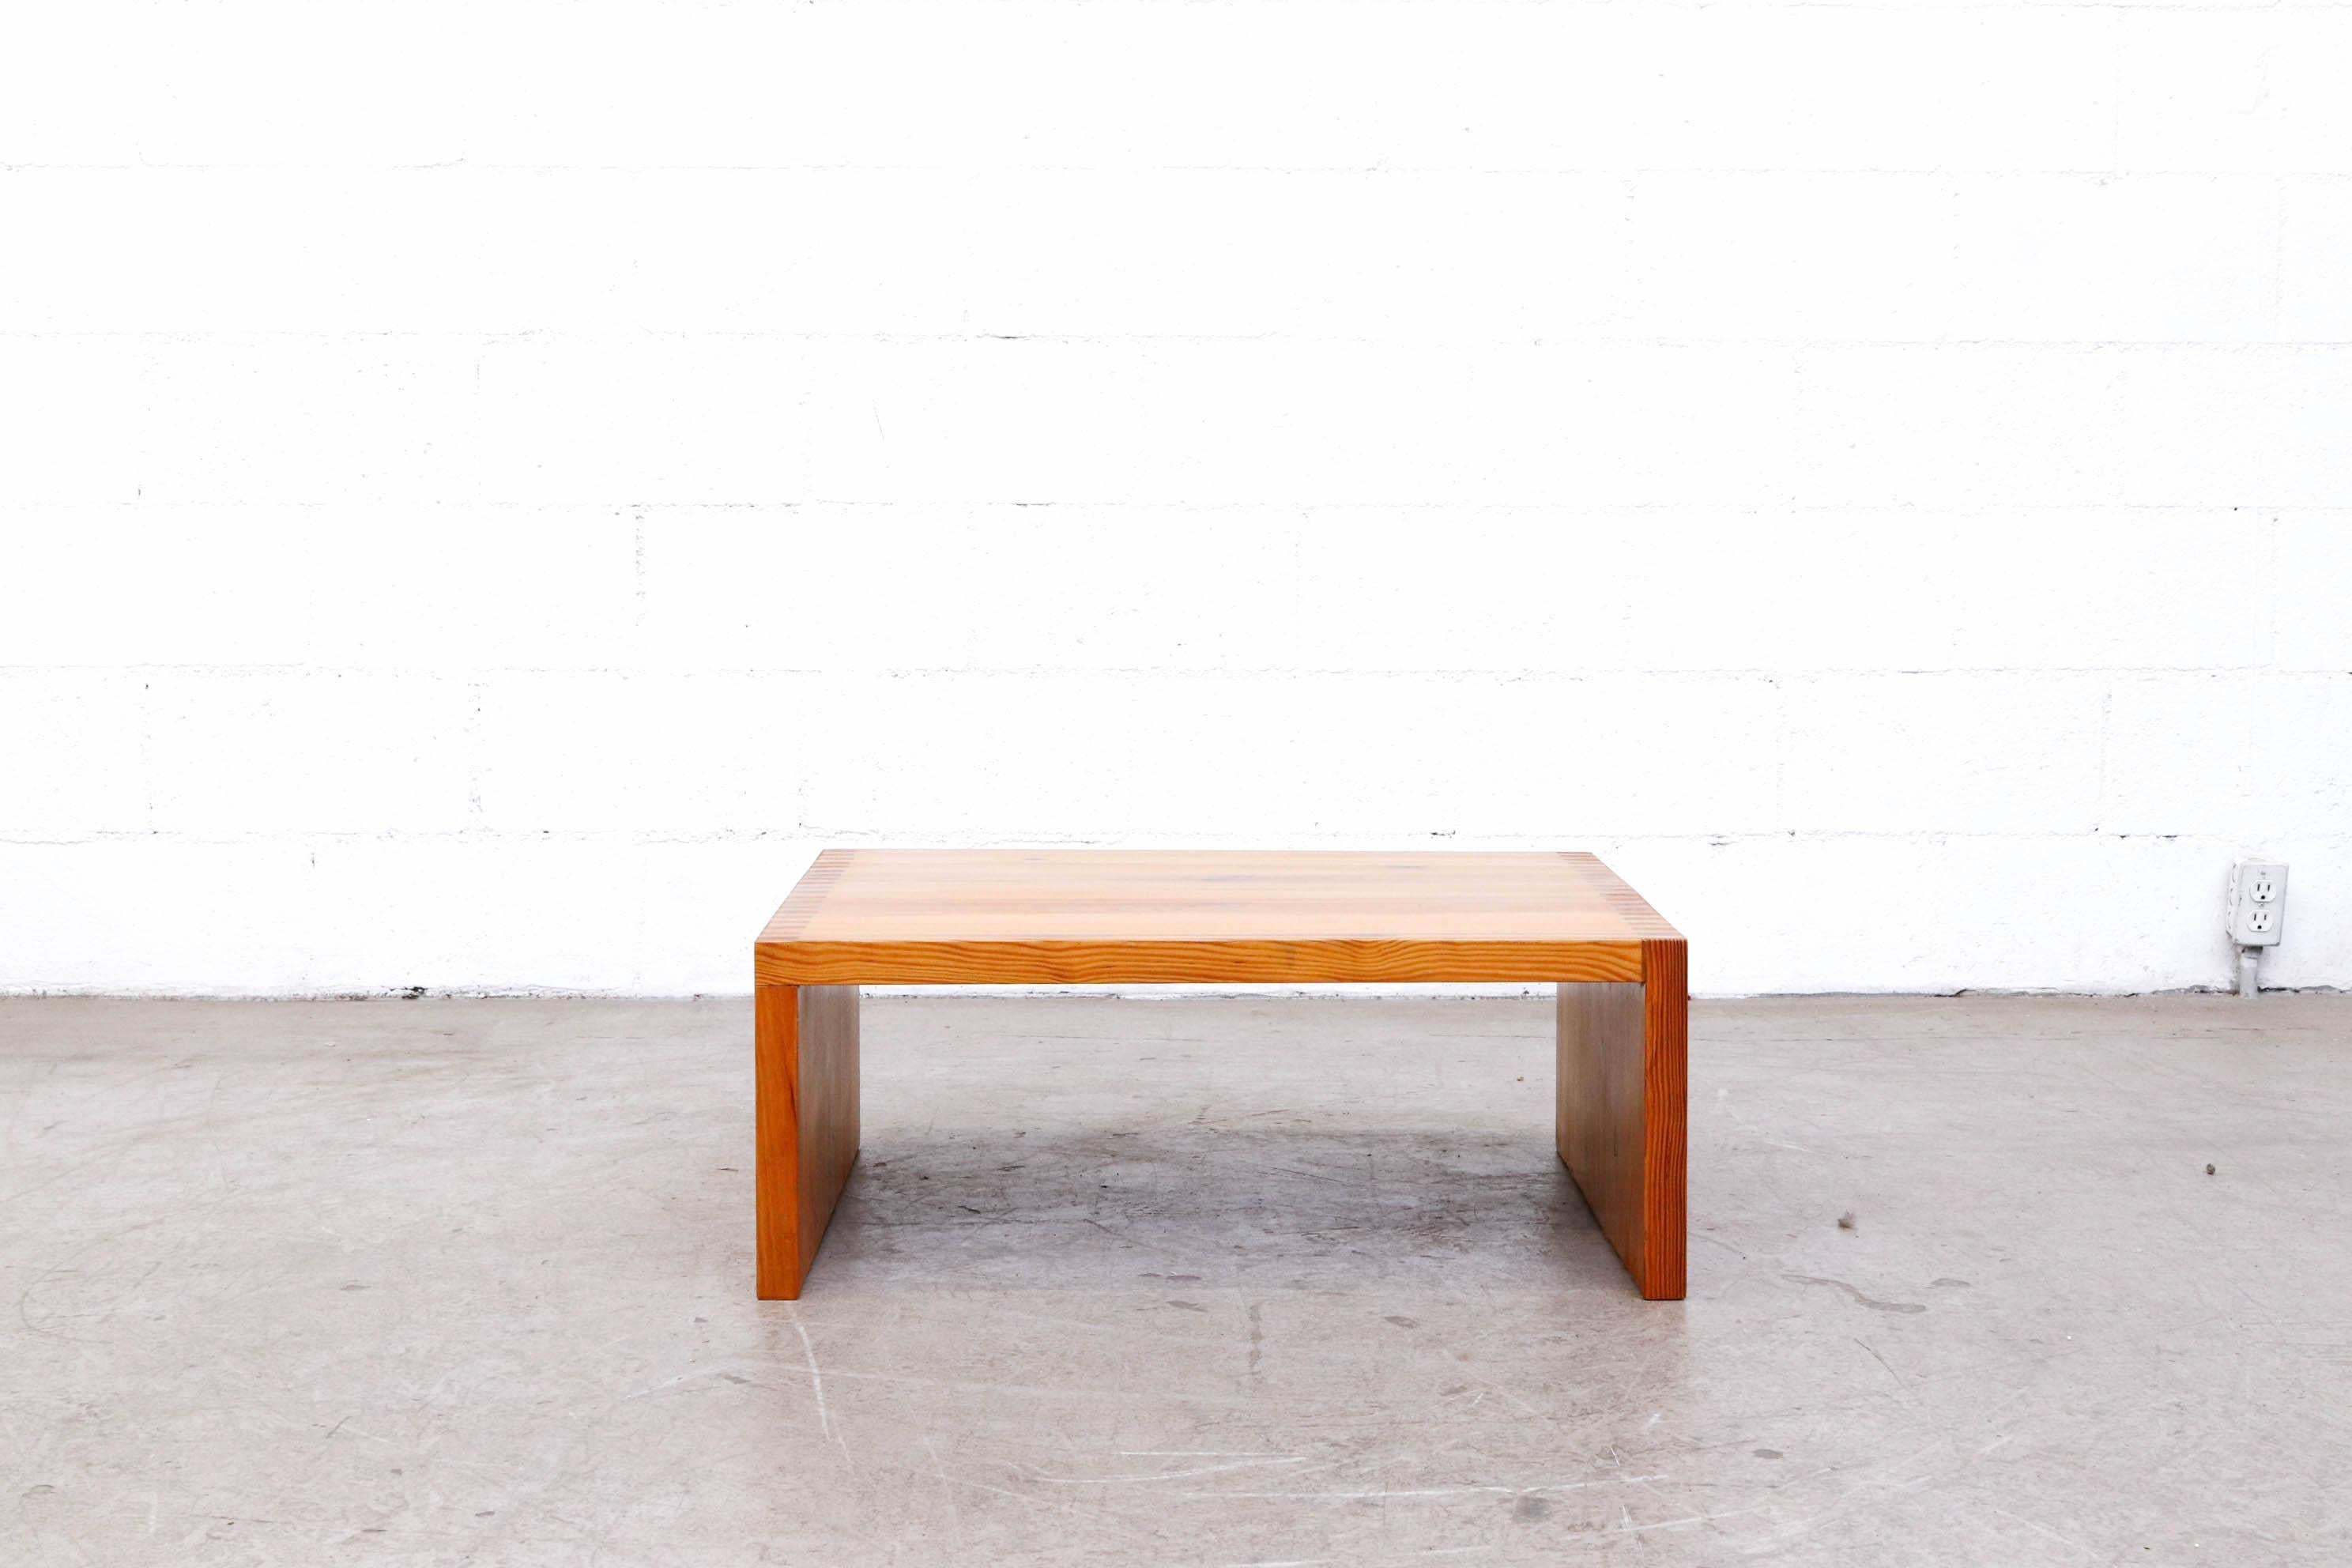 Small Ate Van Apeldoorn pine coffee table or bench. Beautifully patterned wood and secured with box joints. In original condition with light signs of wear consistent with age and use. Similar tables available and listed separately.